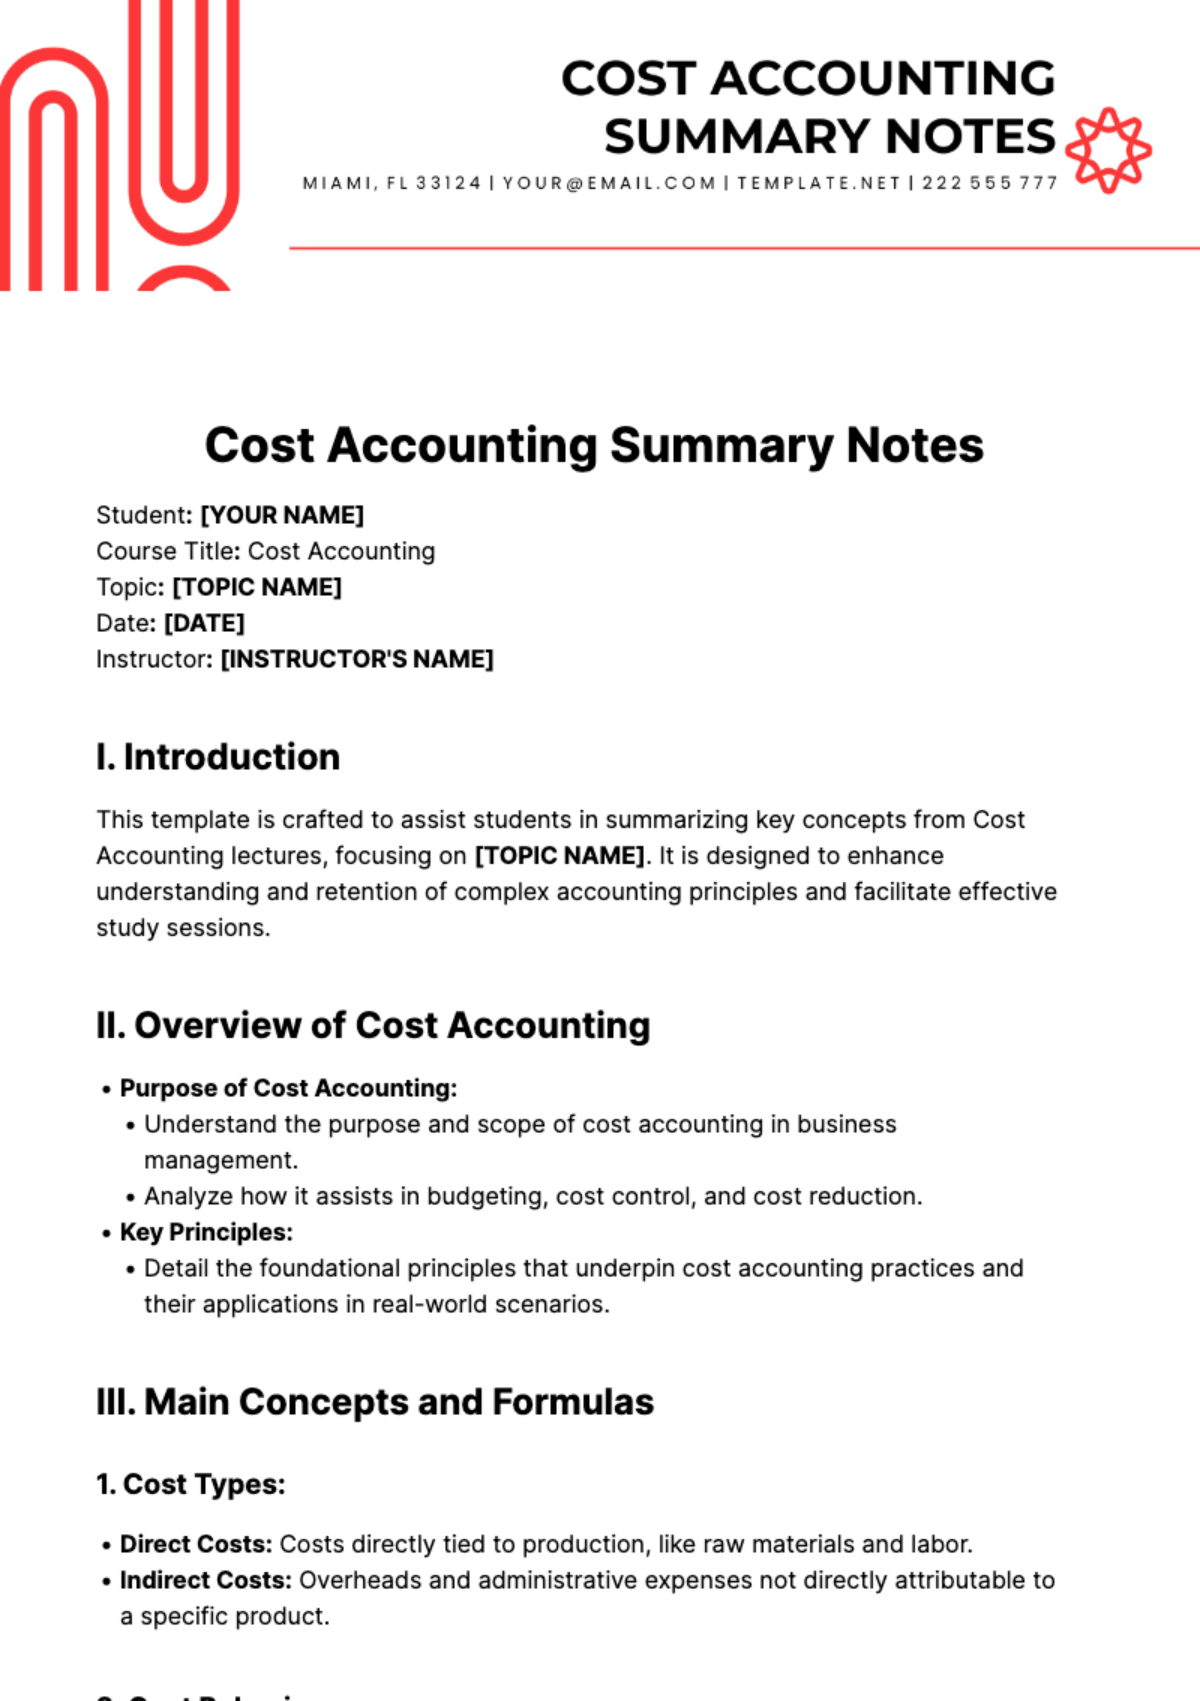 Cost Accounting Summary Notes Template